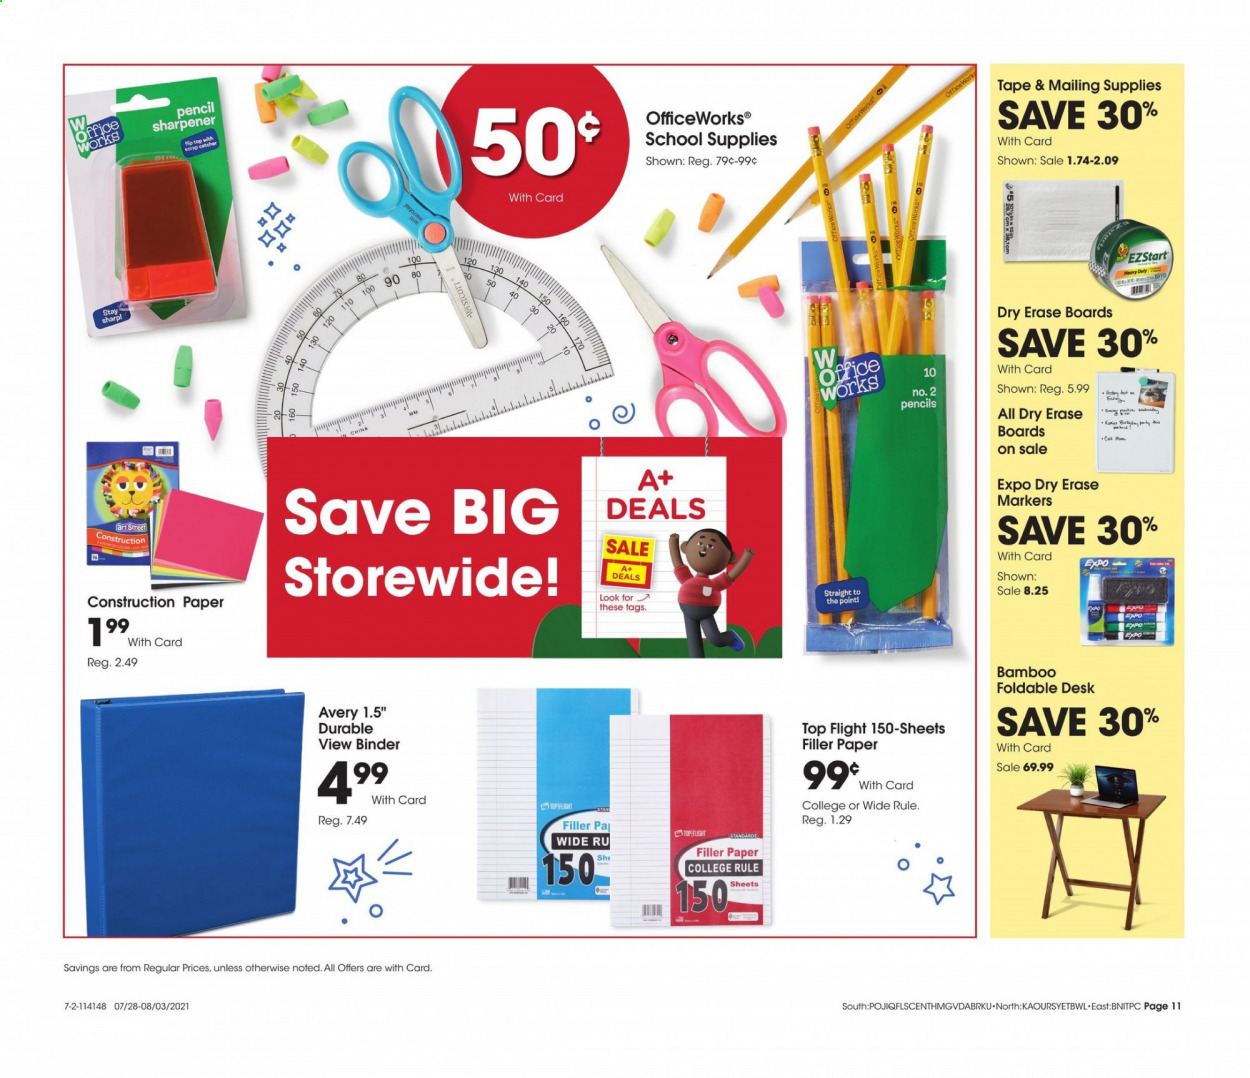 Fred Meyer ad  - 07.28.2021 - 08.03.2021.